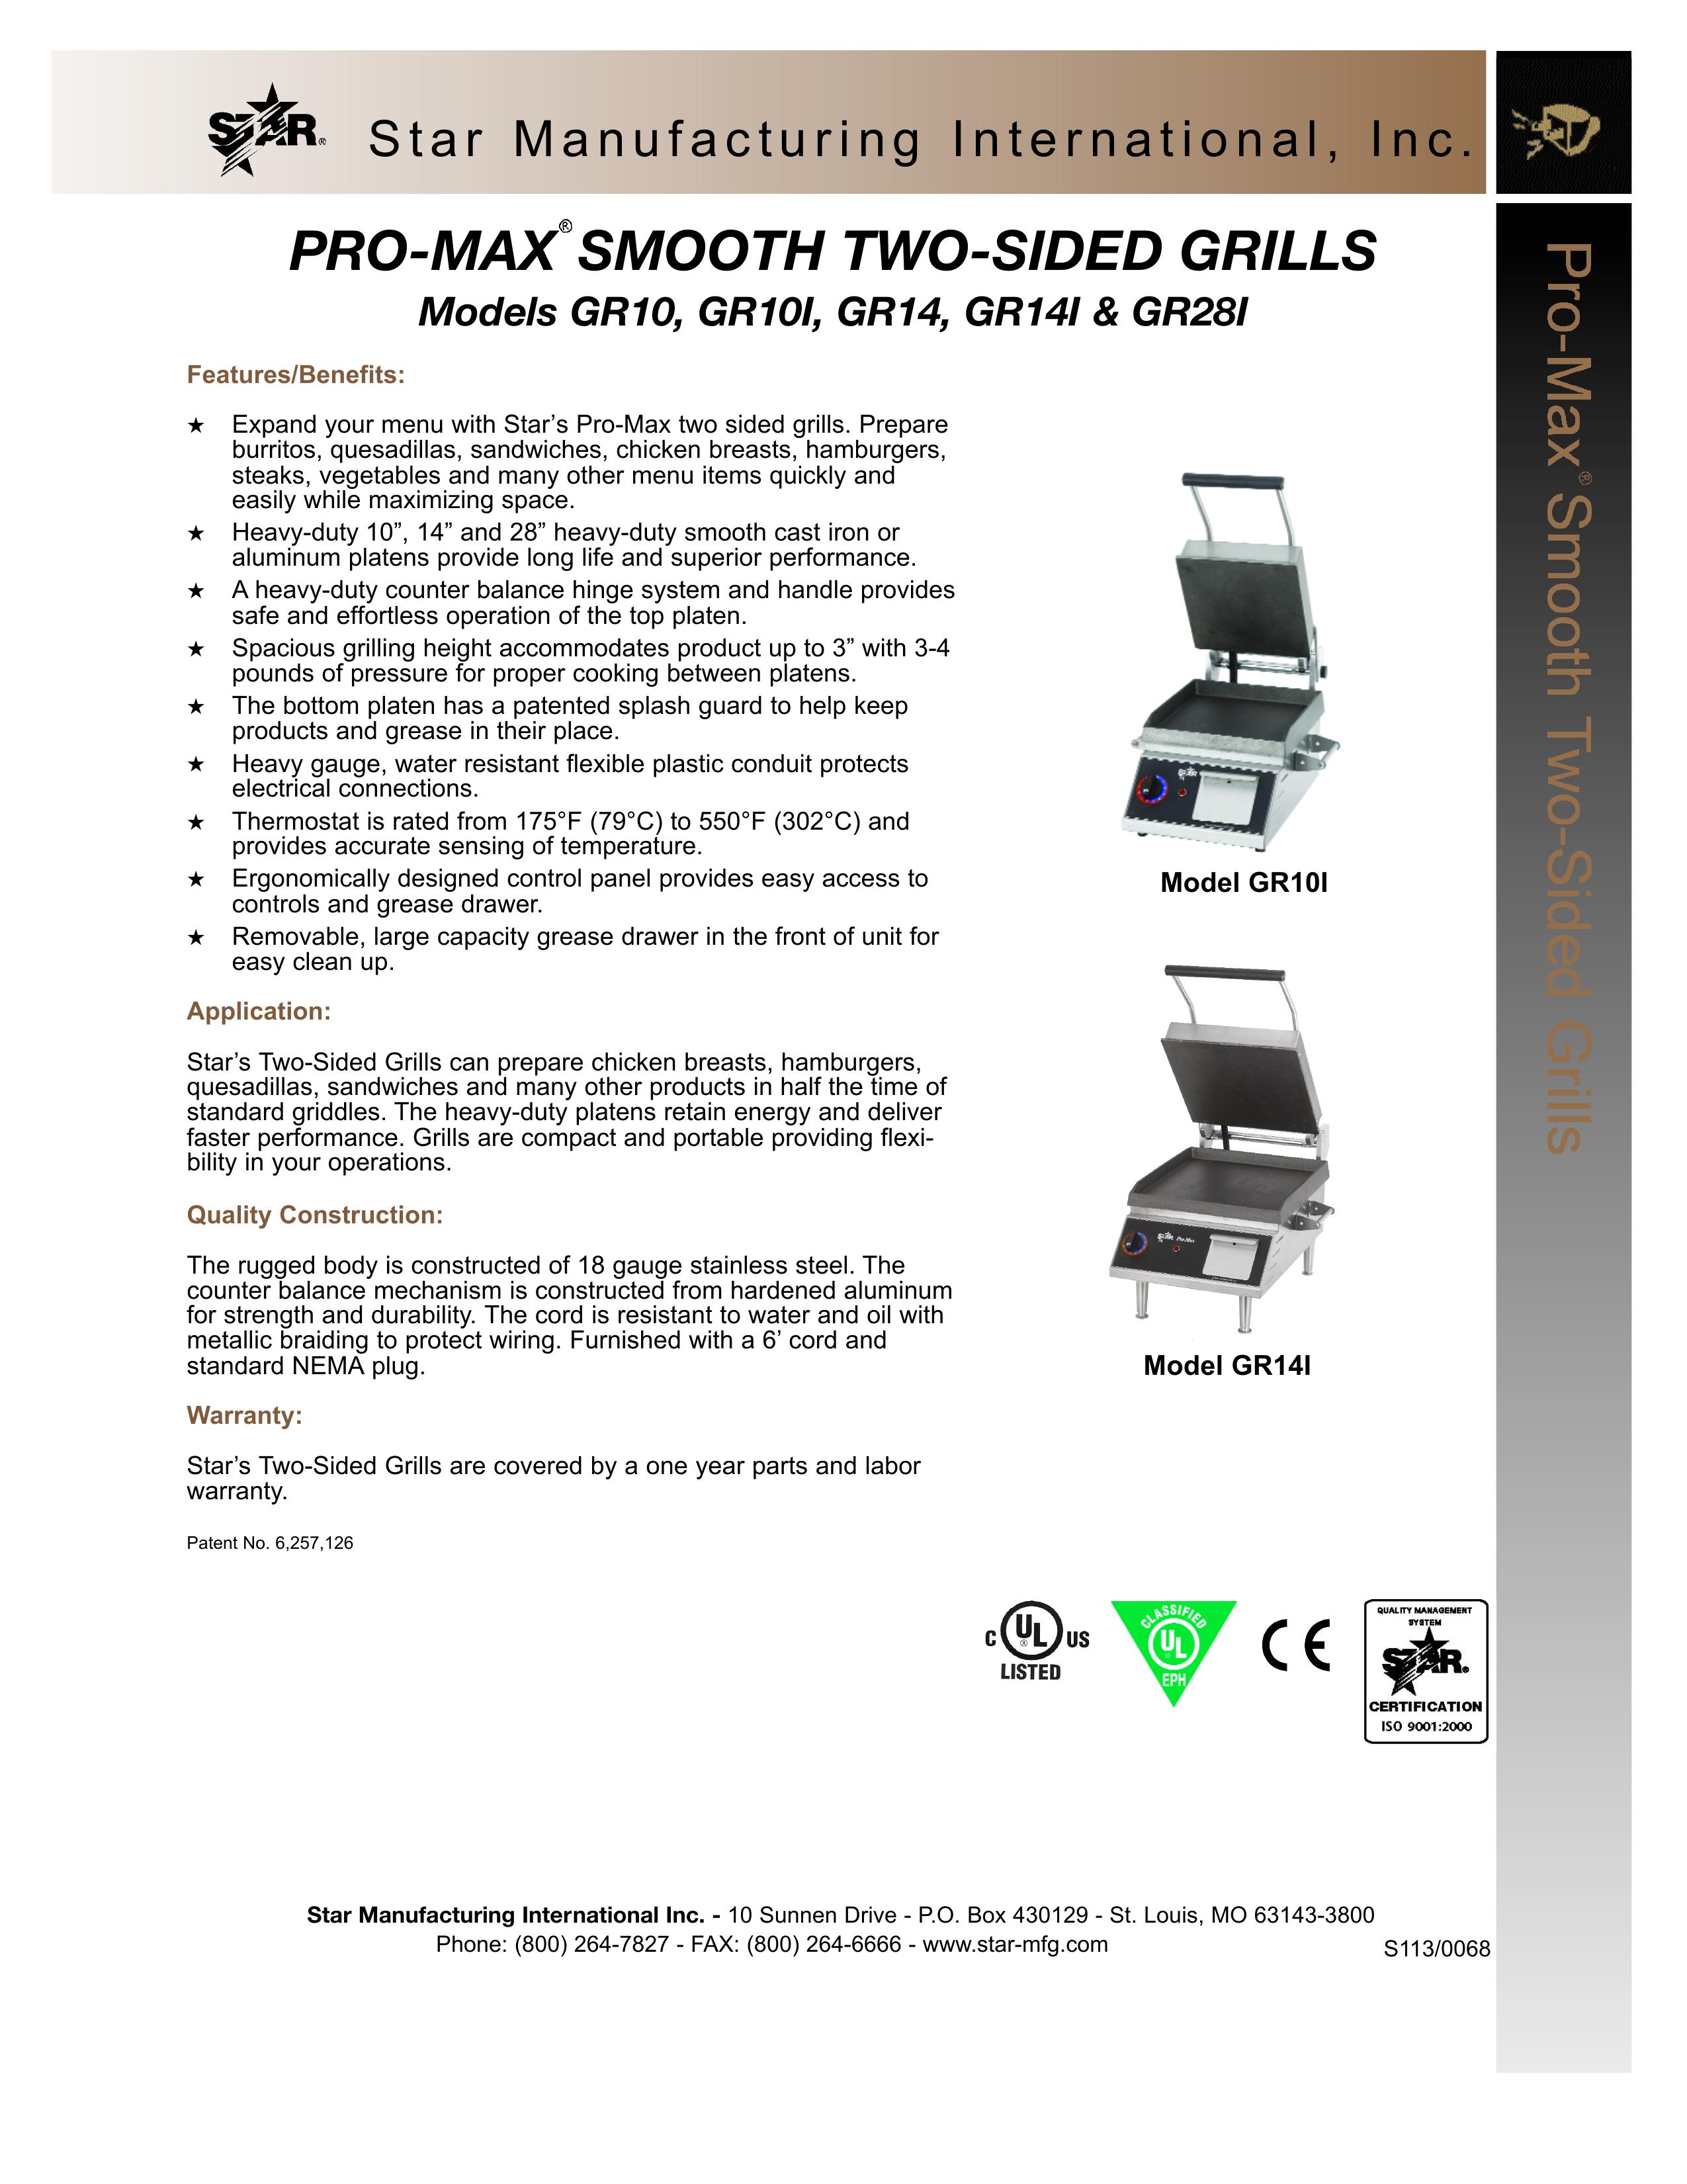 Star Manufacturing GR14I Electric Grill User Manual